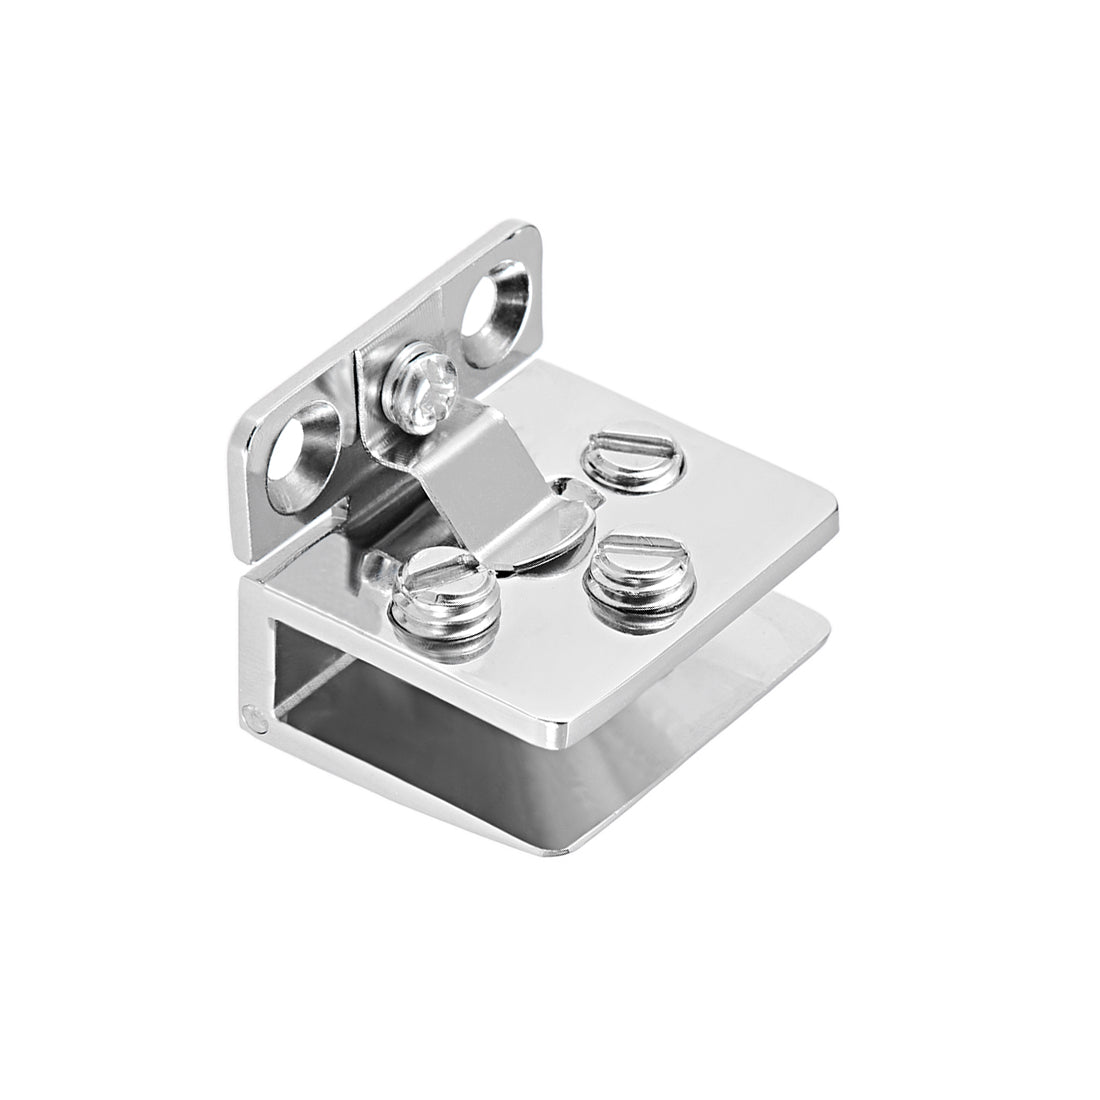 uxcell Uxcell Glass Hinge Cupboard Showcase Cabinet Door Hinge Glass Clamp ,Zinc Alloy , for 5-8mm Glass Thickness 2Pcs